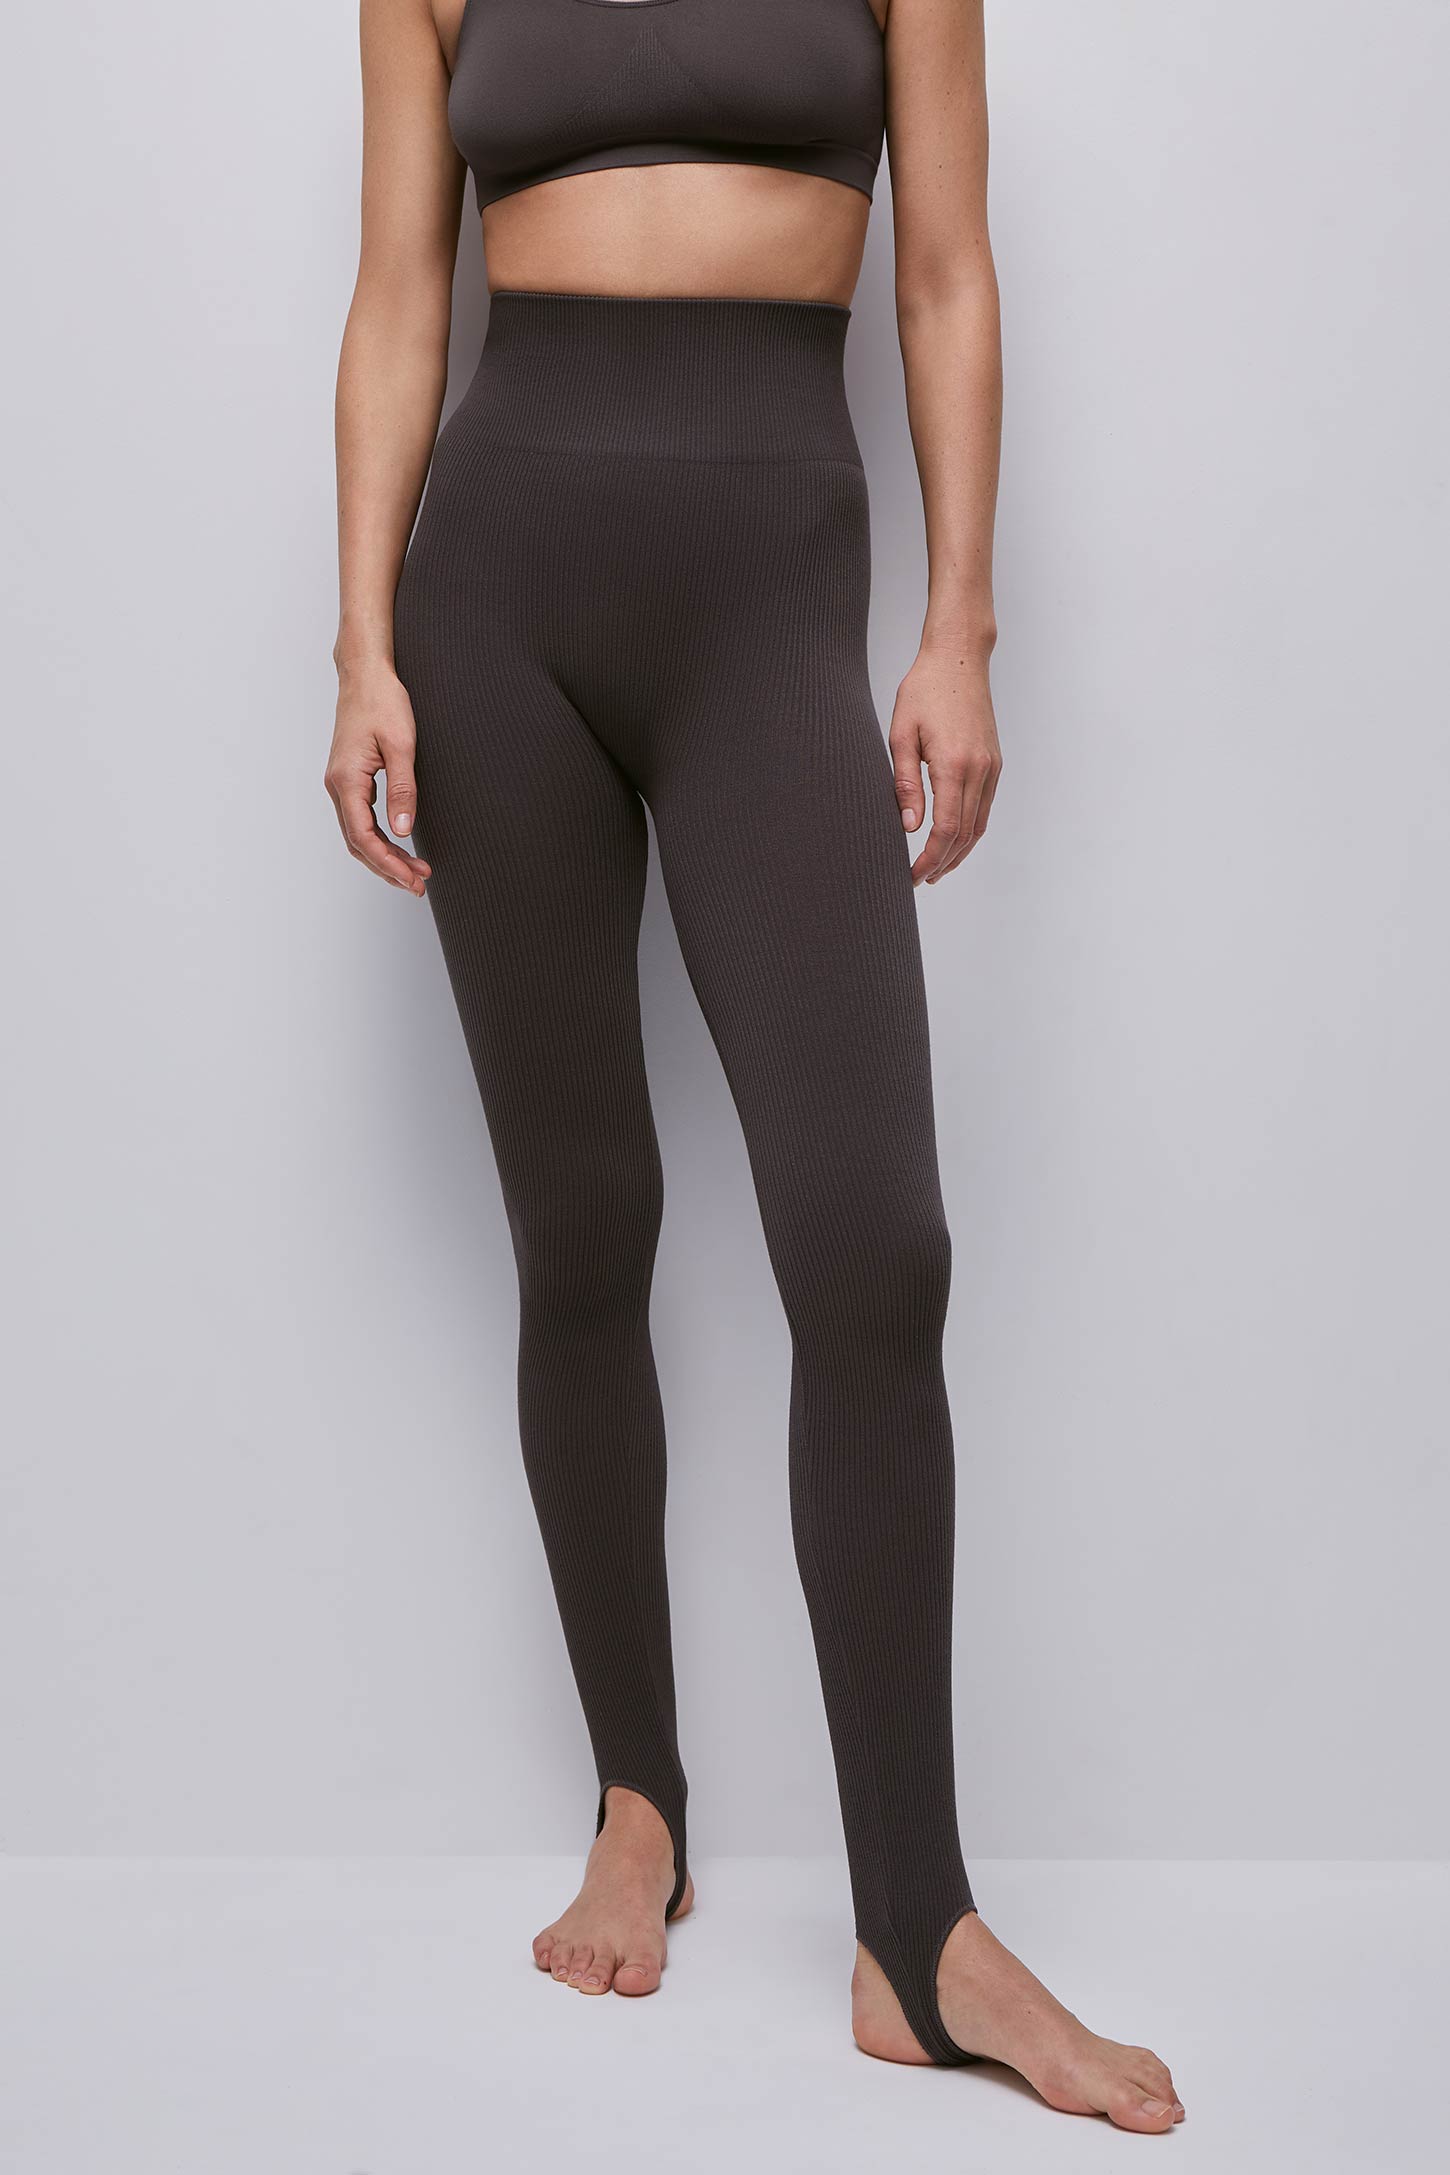 Bamboo Rib High Waisted Legging by C'est Moi – Ash and Antler